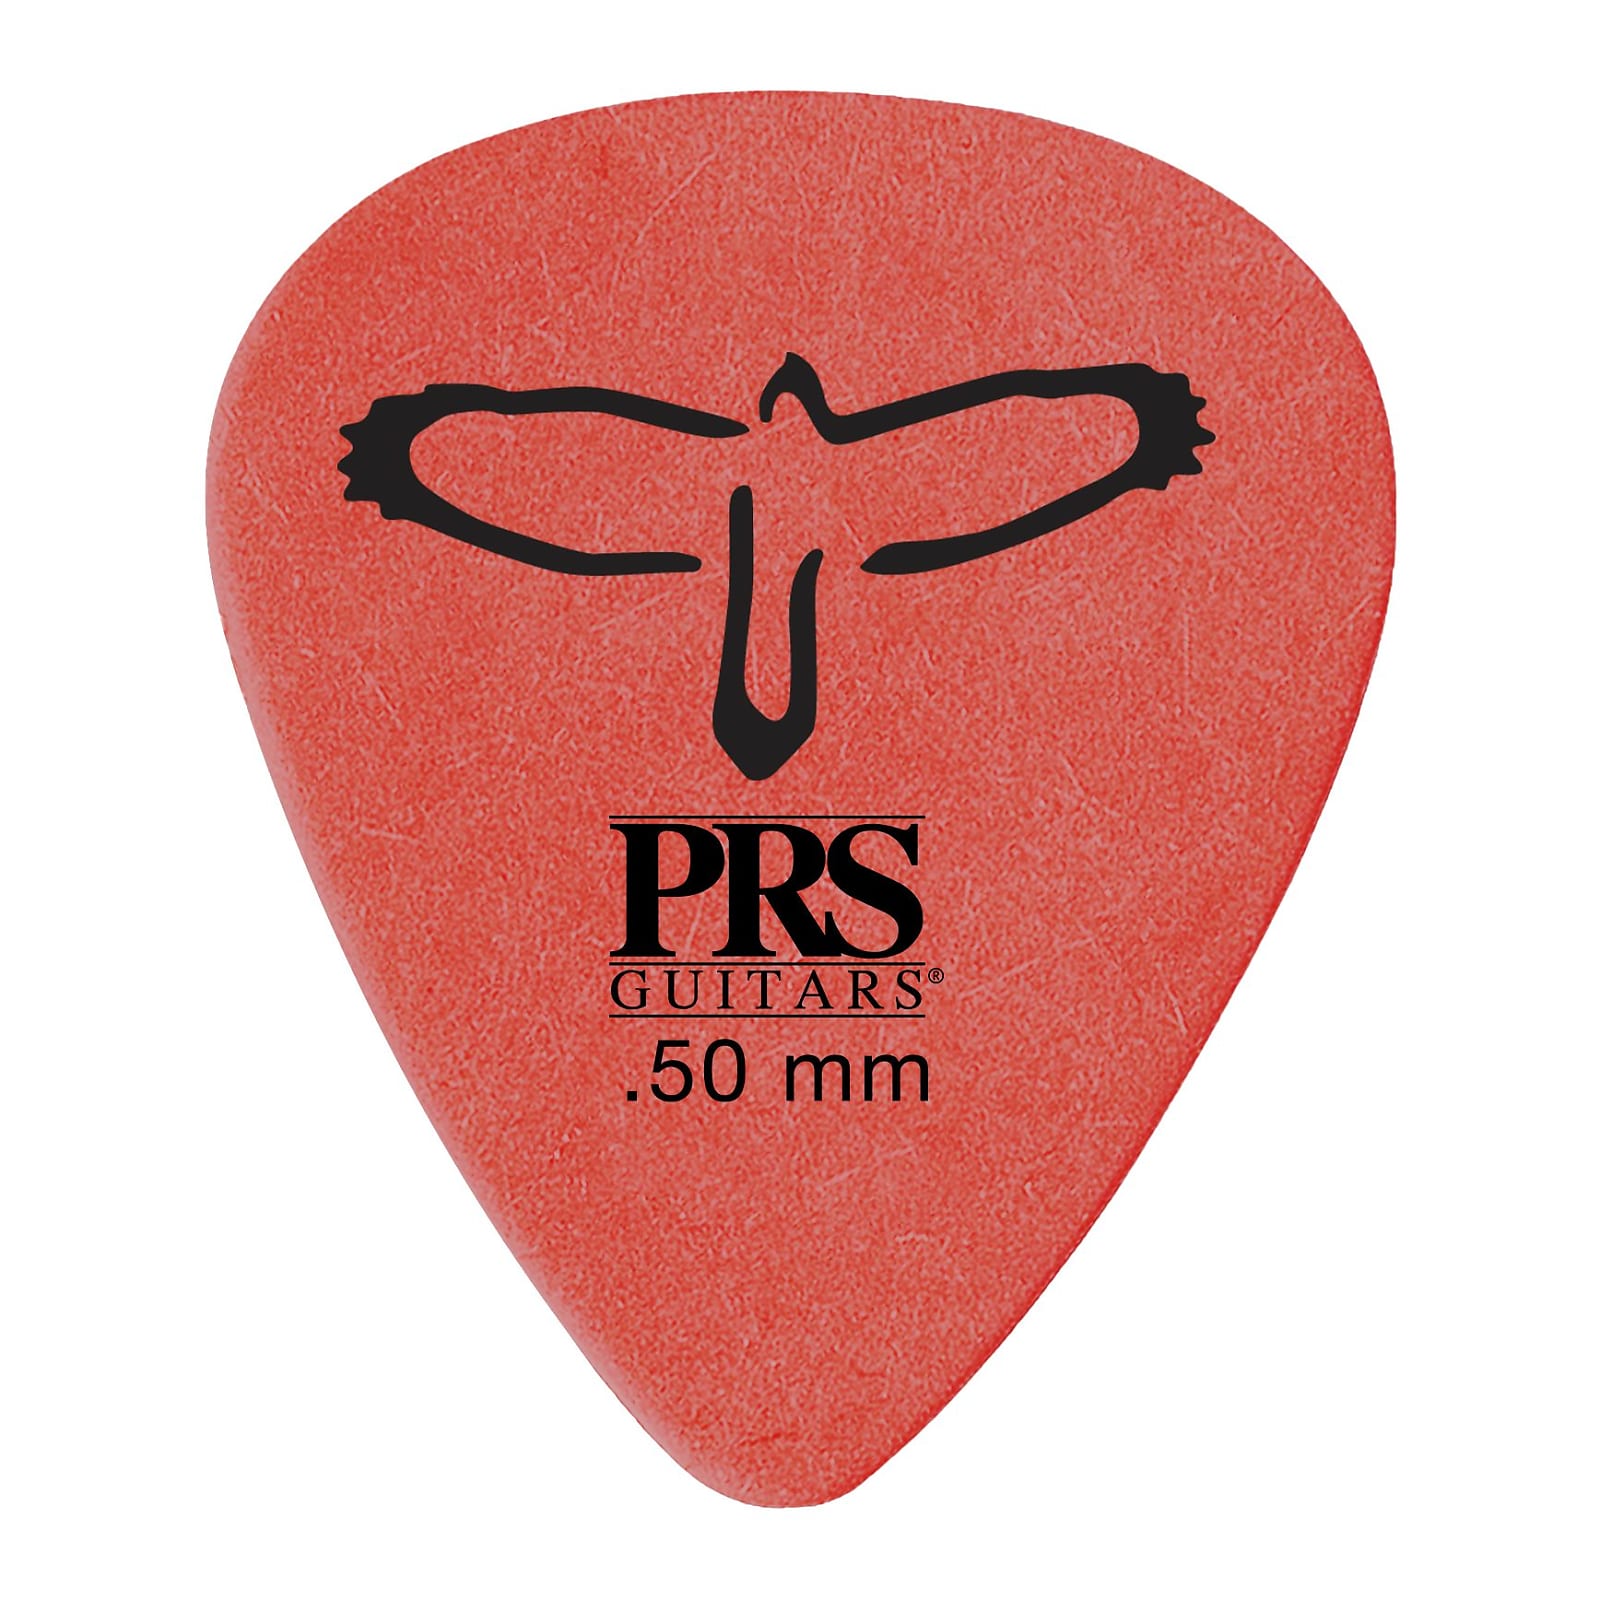 Paul Reed Smith PRS Delrin Guitar Picks (12) (0.50mm - Red)